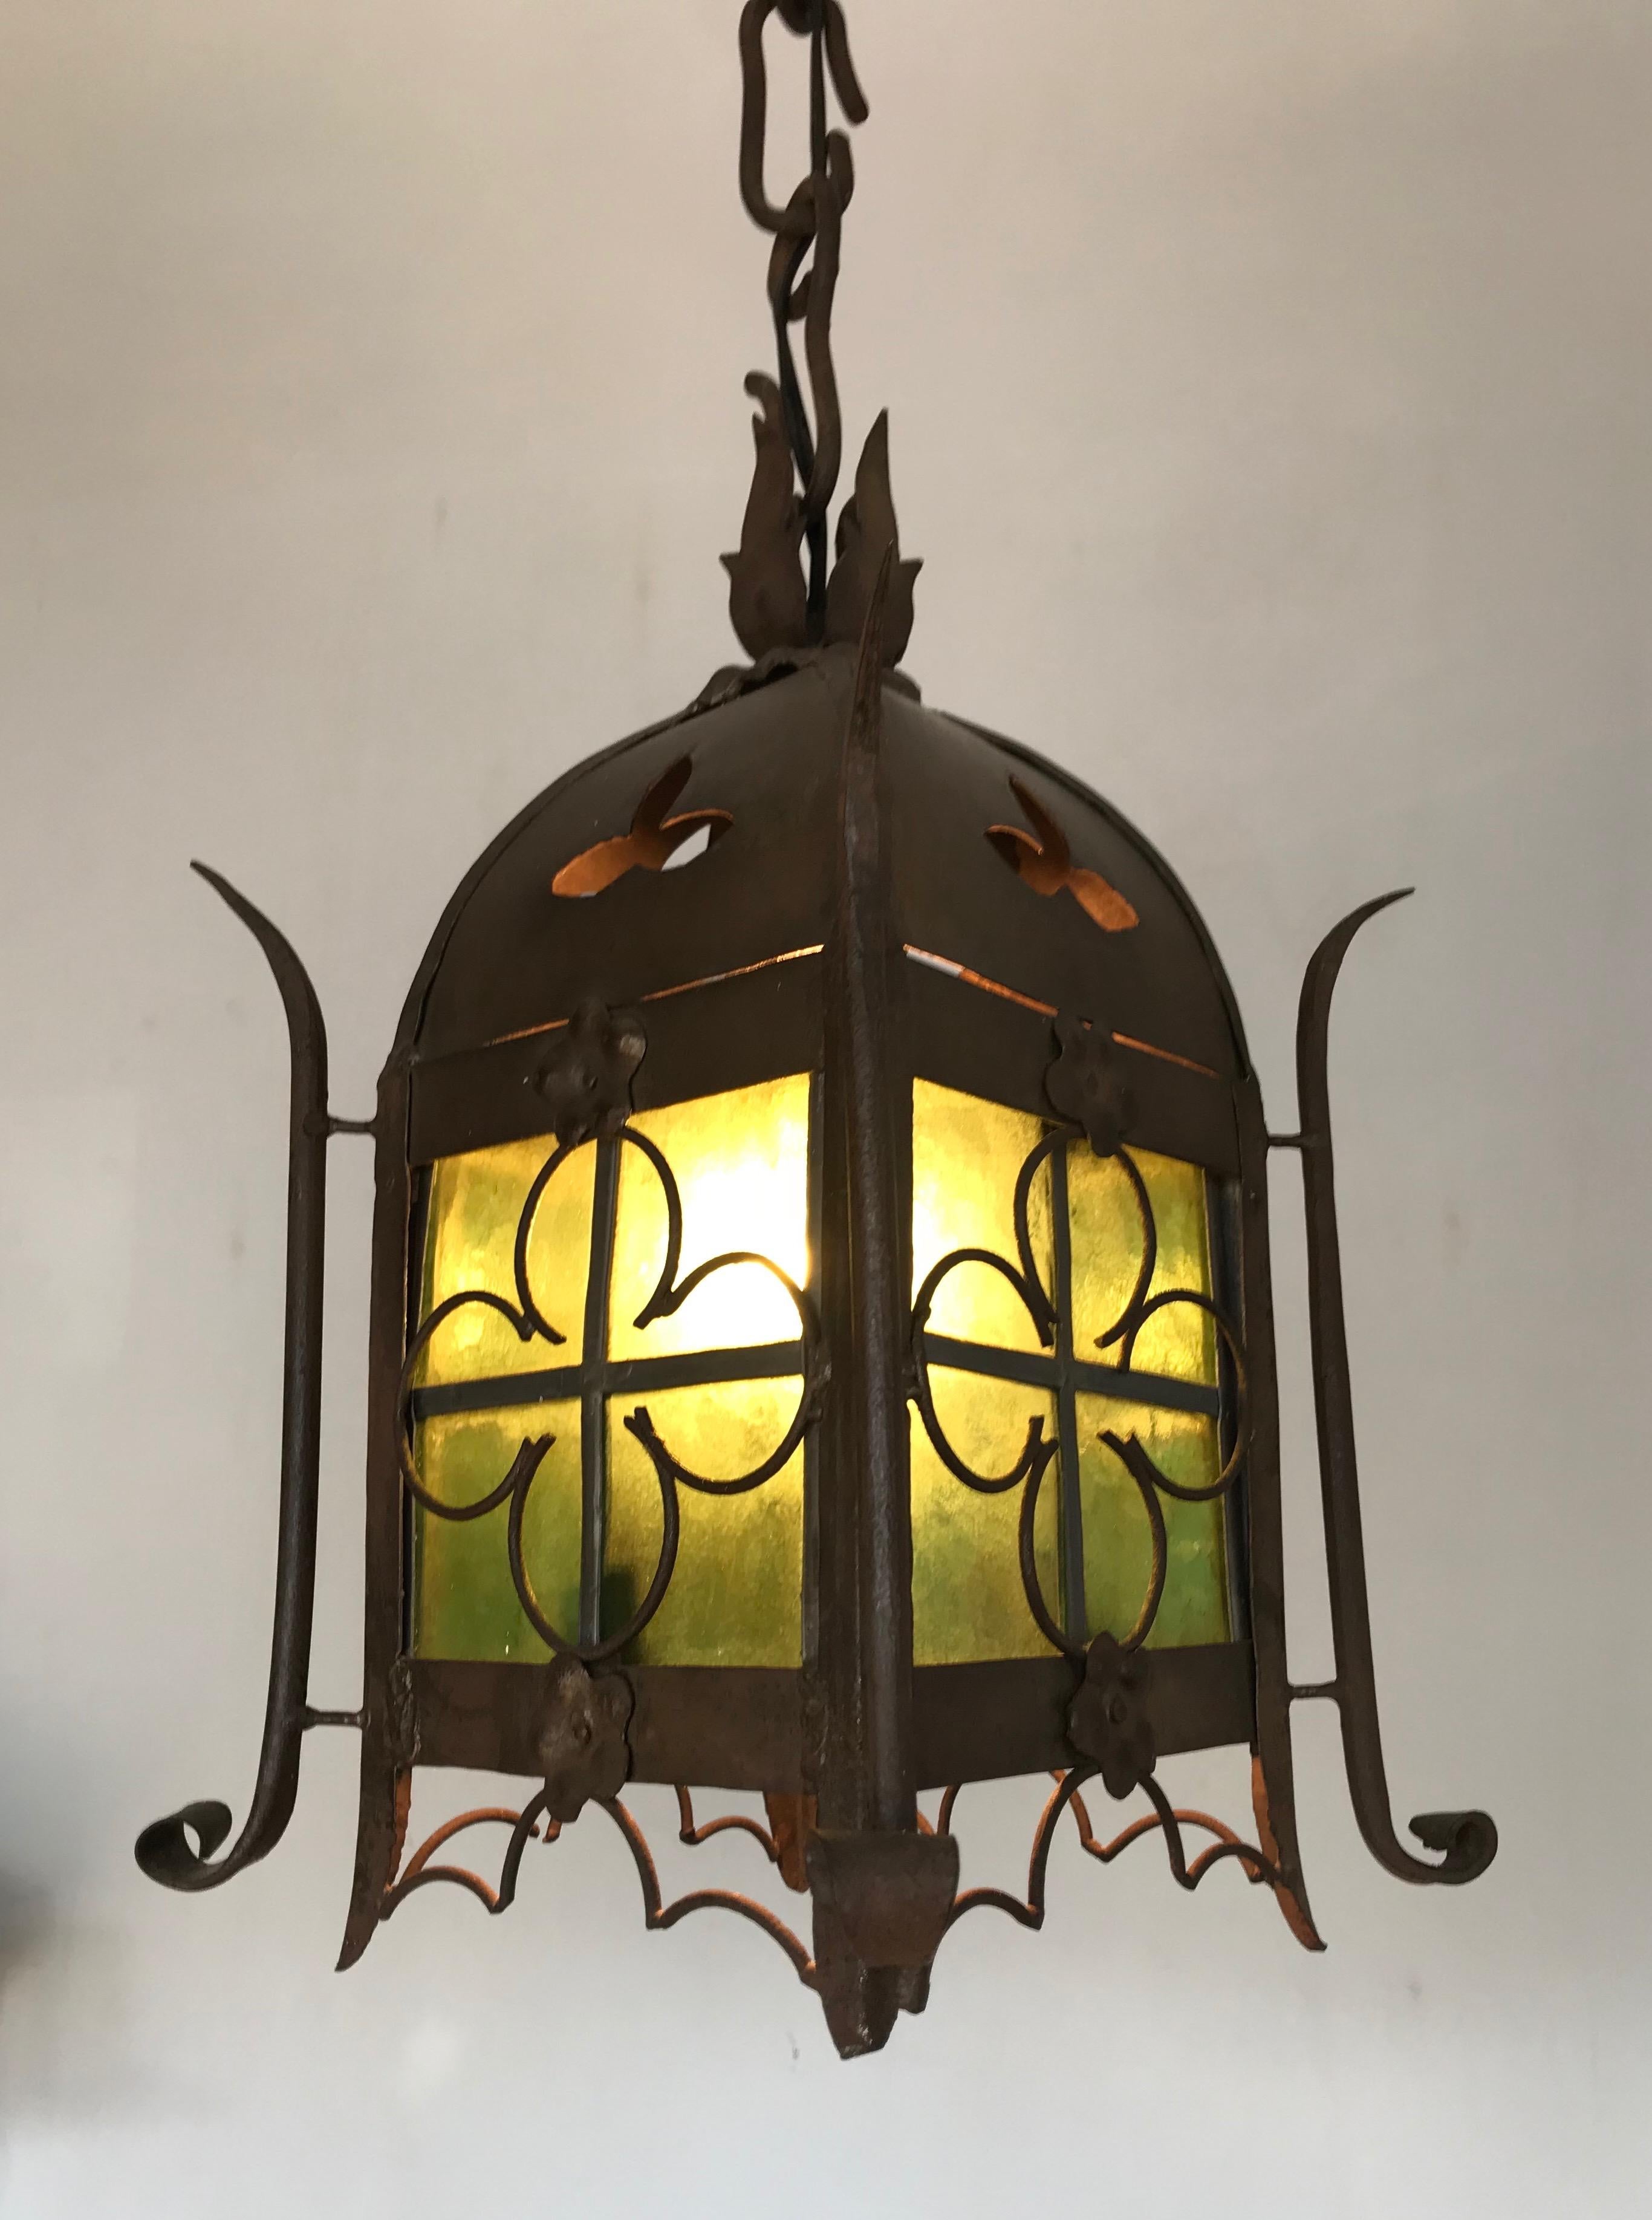 Hand-Crafted Early 1900s Gothic Revival Wrought Iron and Stained Glass Lantern / Fixture